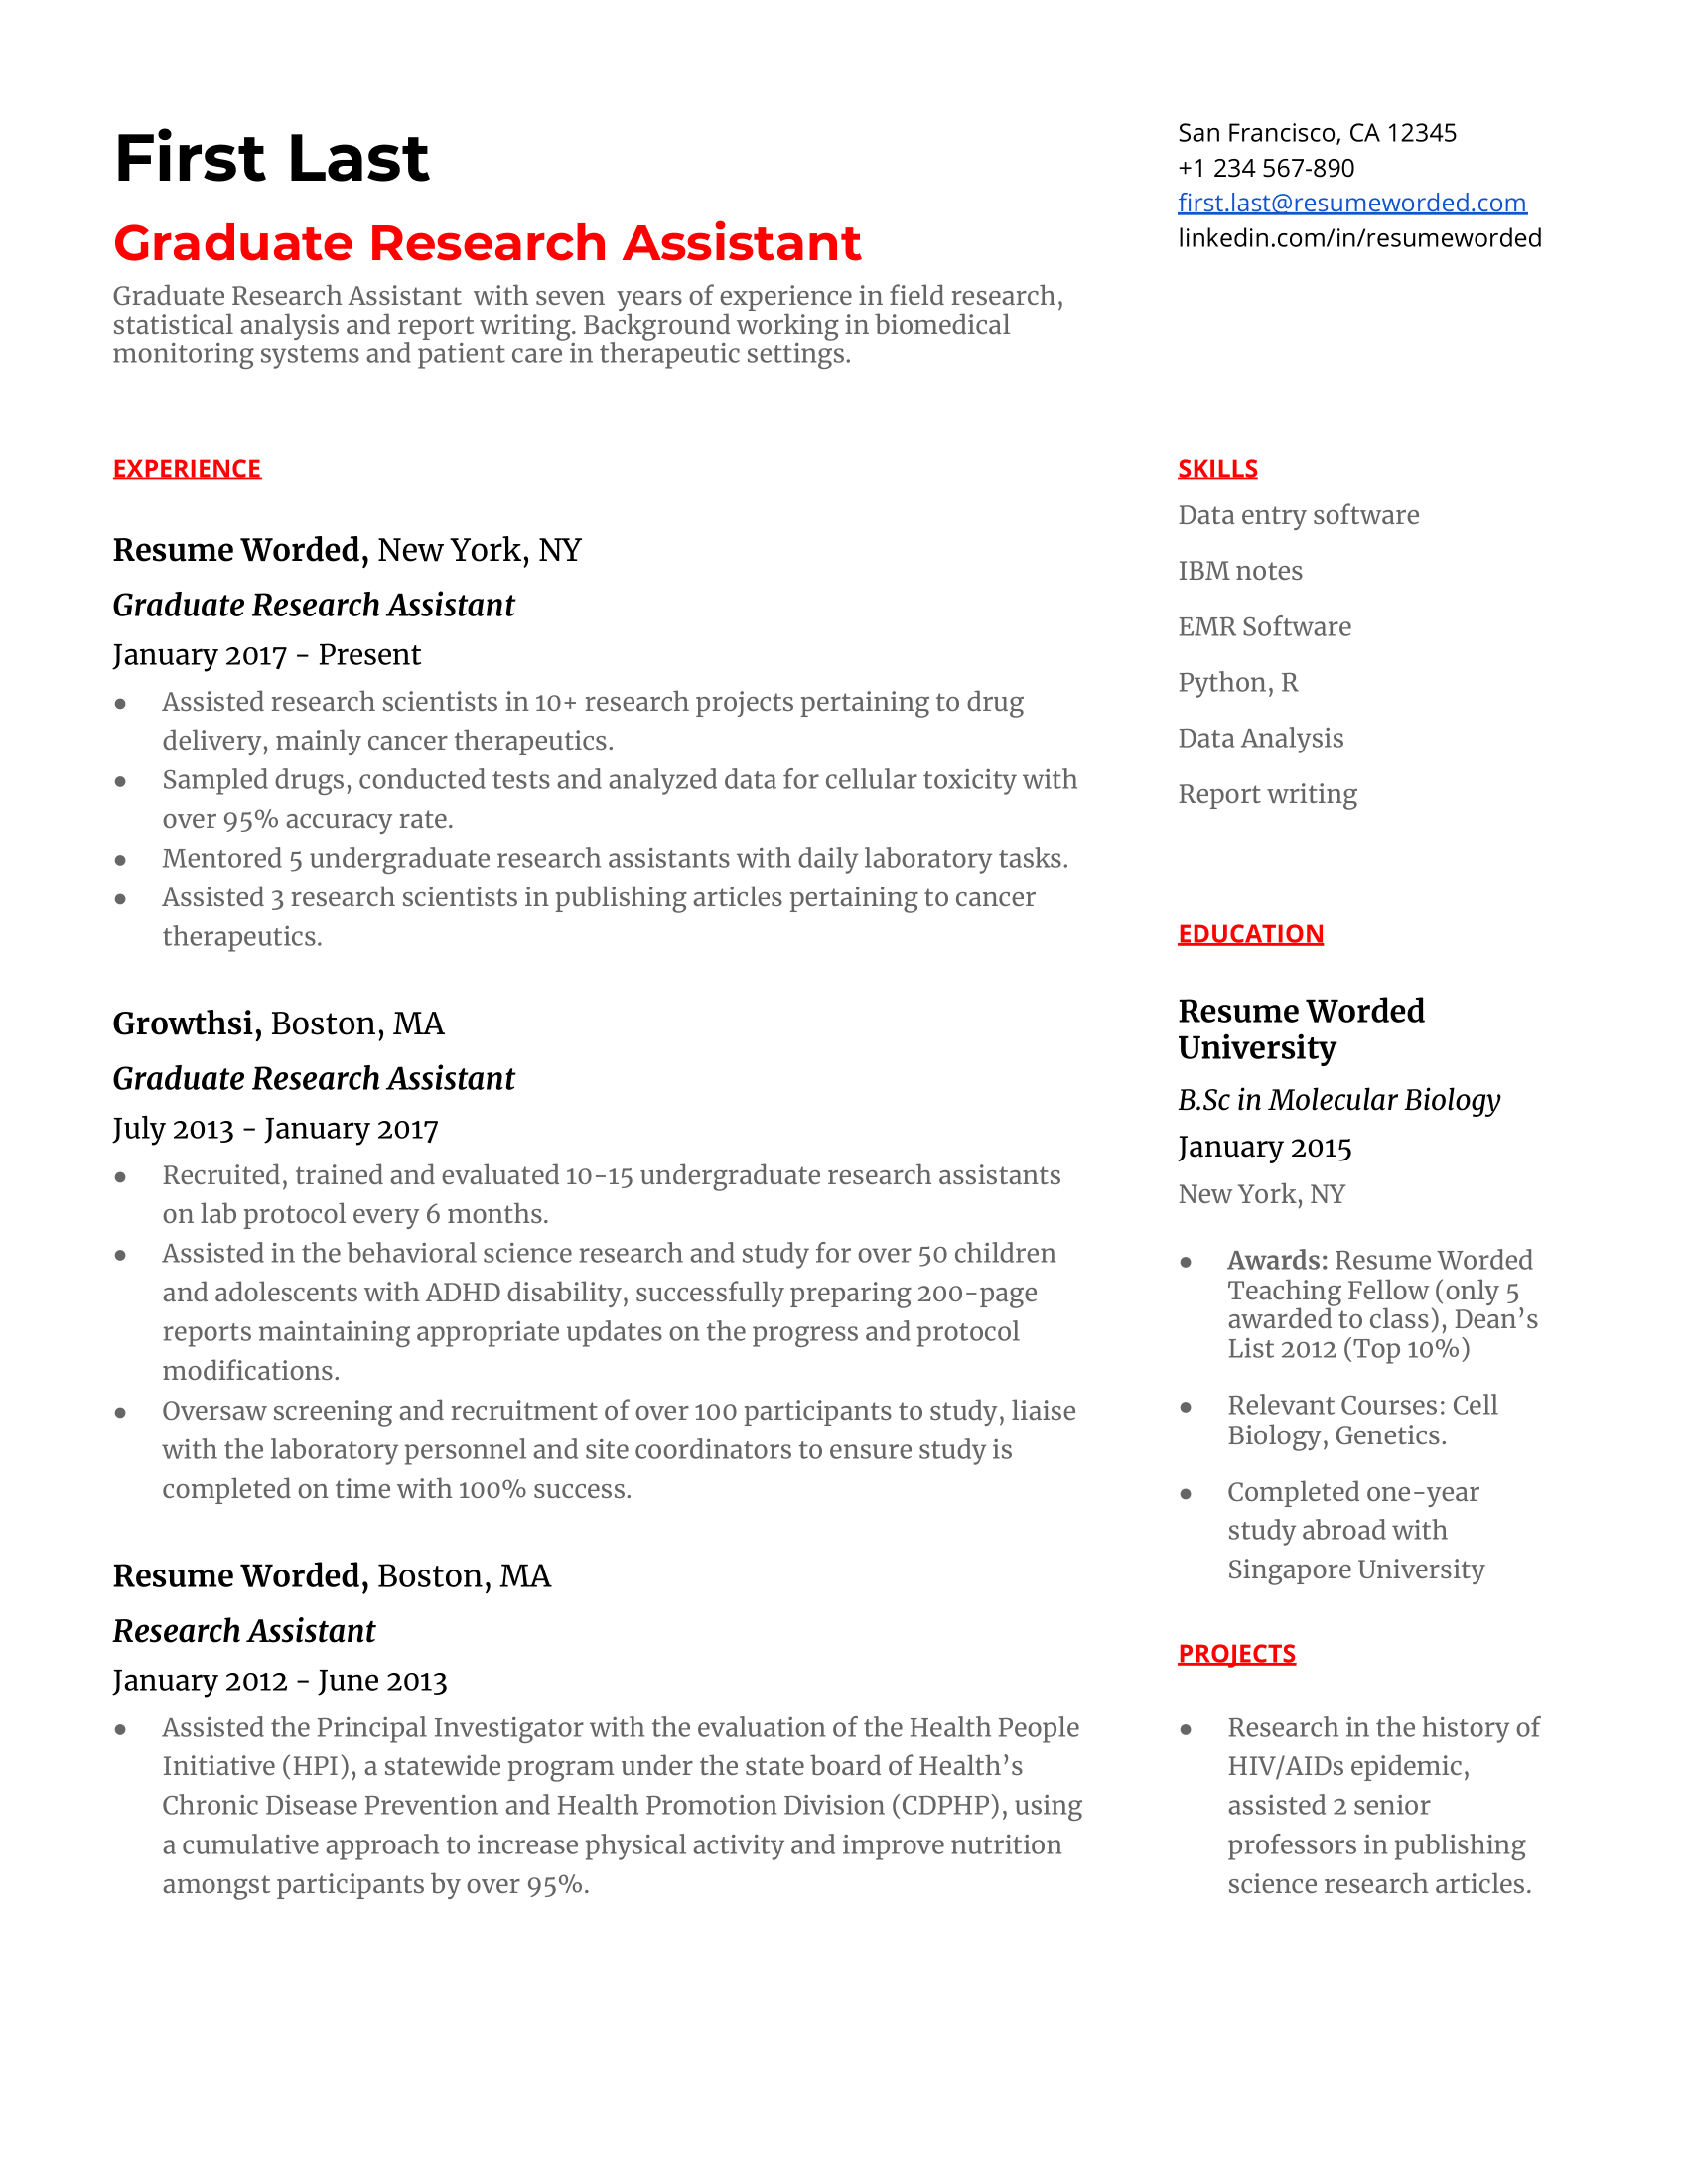 A CV screenshot showcasing the candidate's relevant software proficiency and quantified research impact.